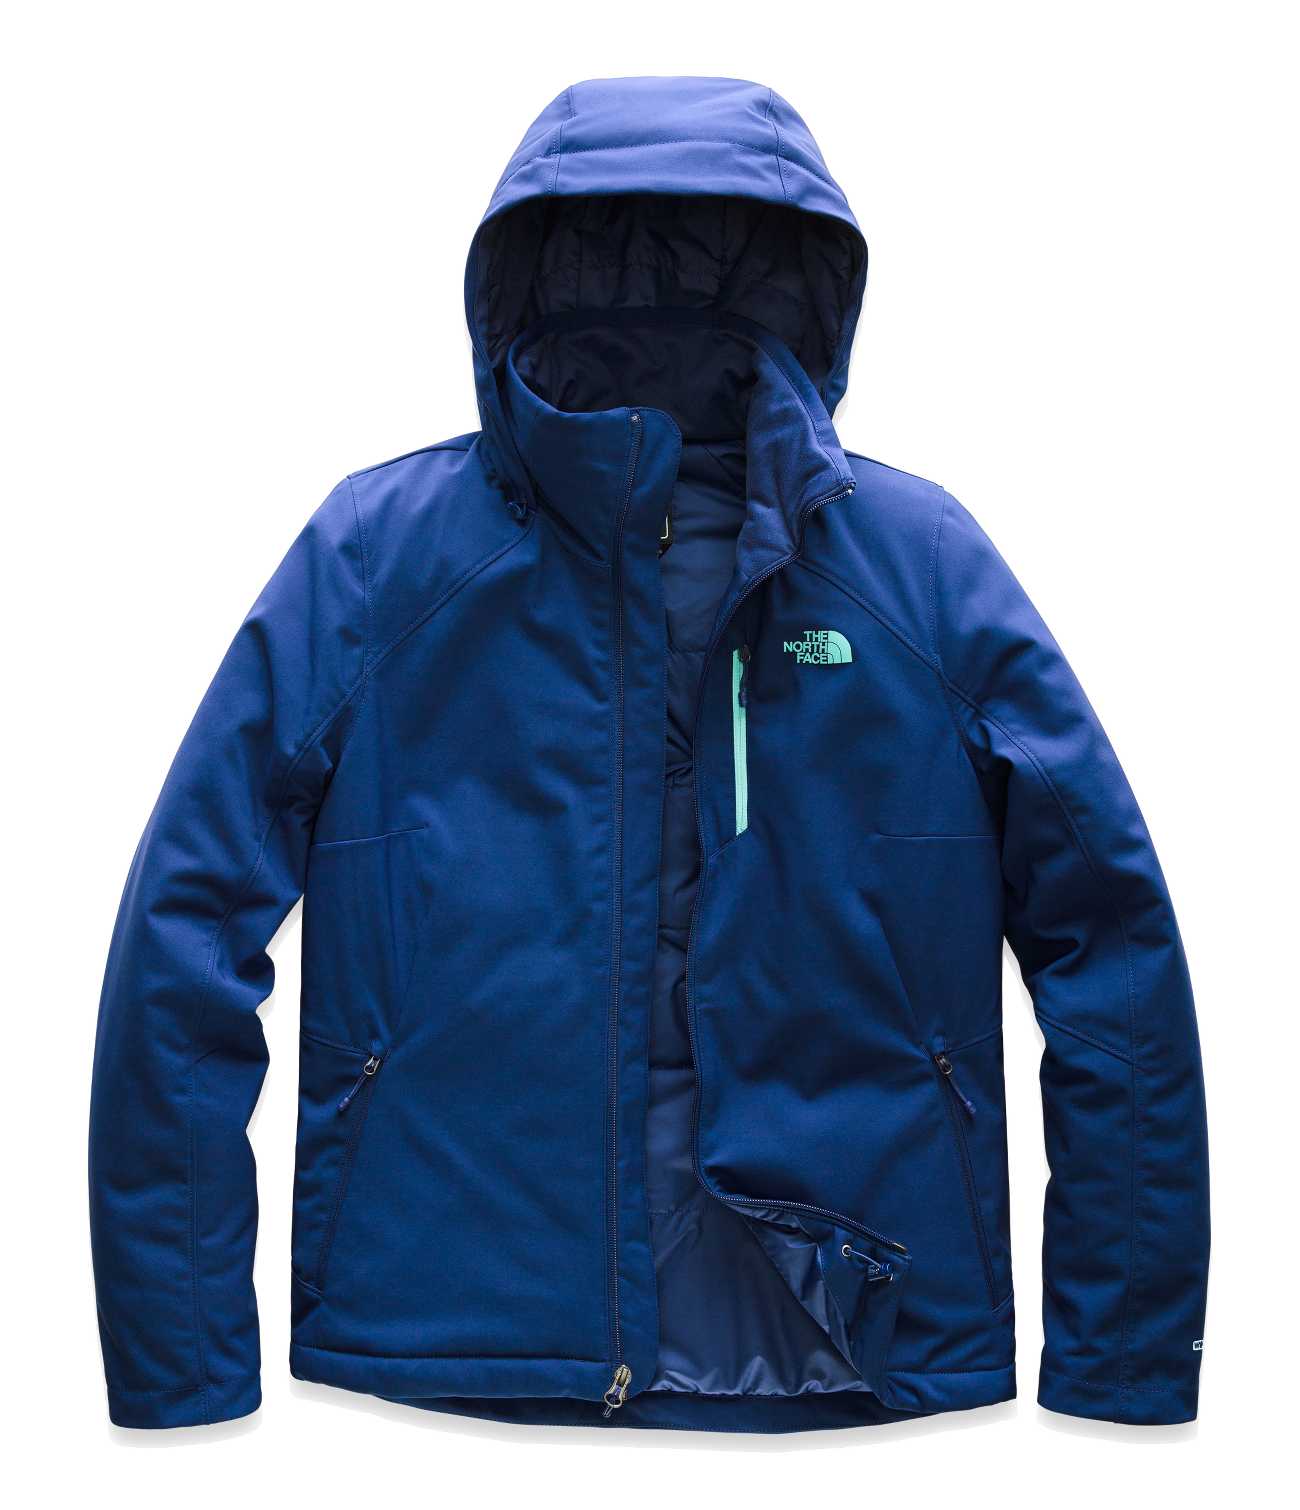 WOMEN'S APEX ELEVATION 2.0 JACKET, The North Face